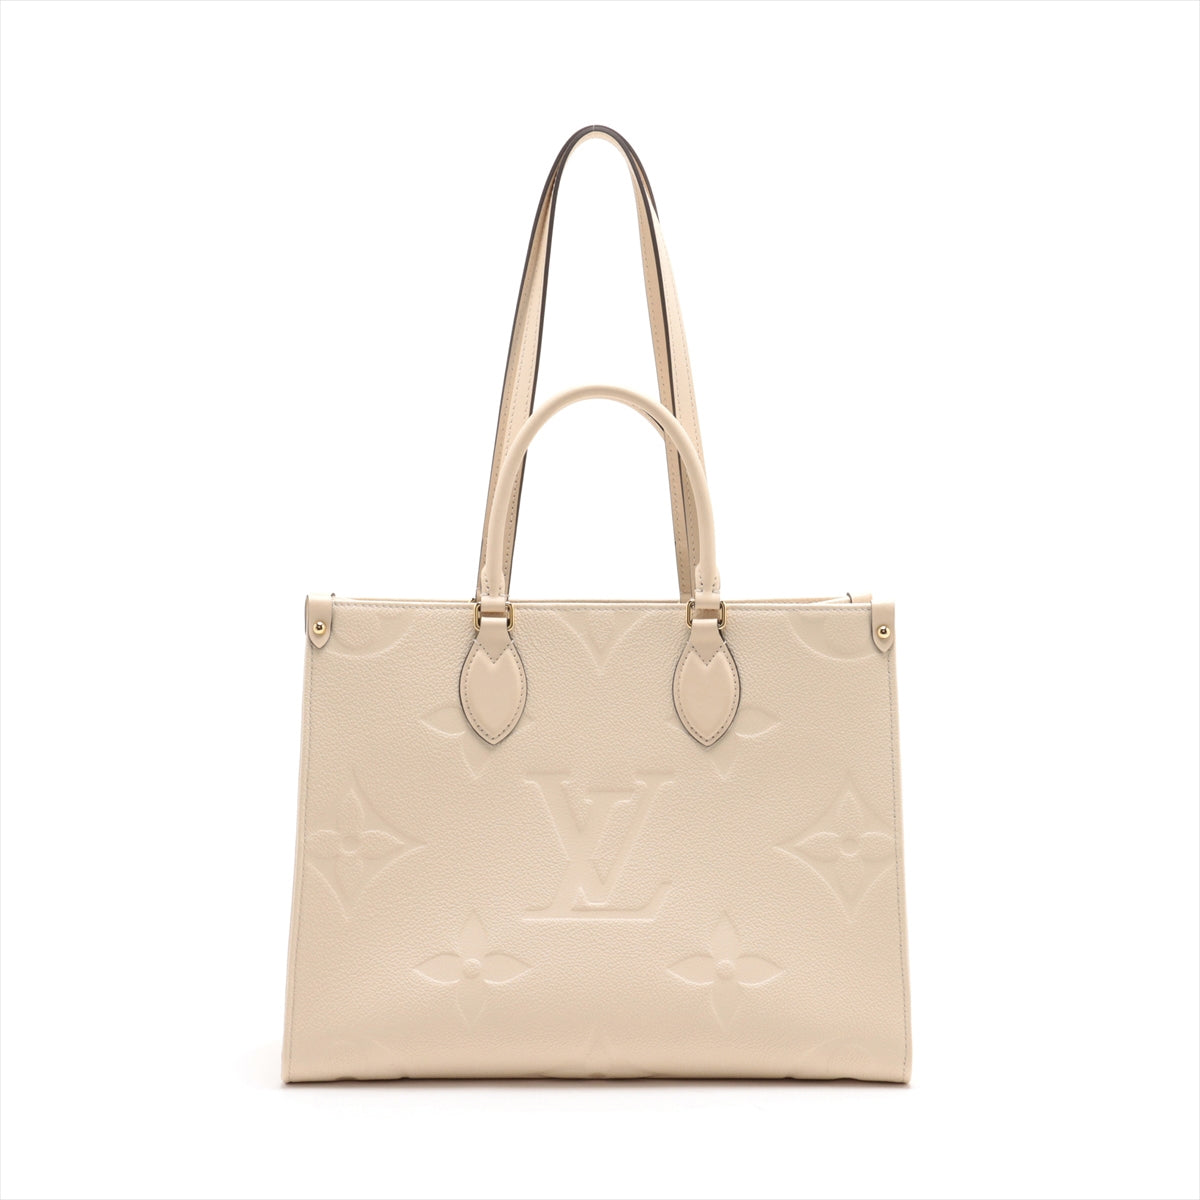 Louis Vuitton Monogram Empreinte On the Go MM M46531 There was an RFID response